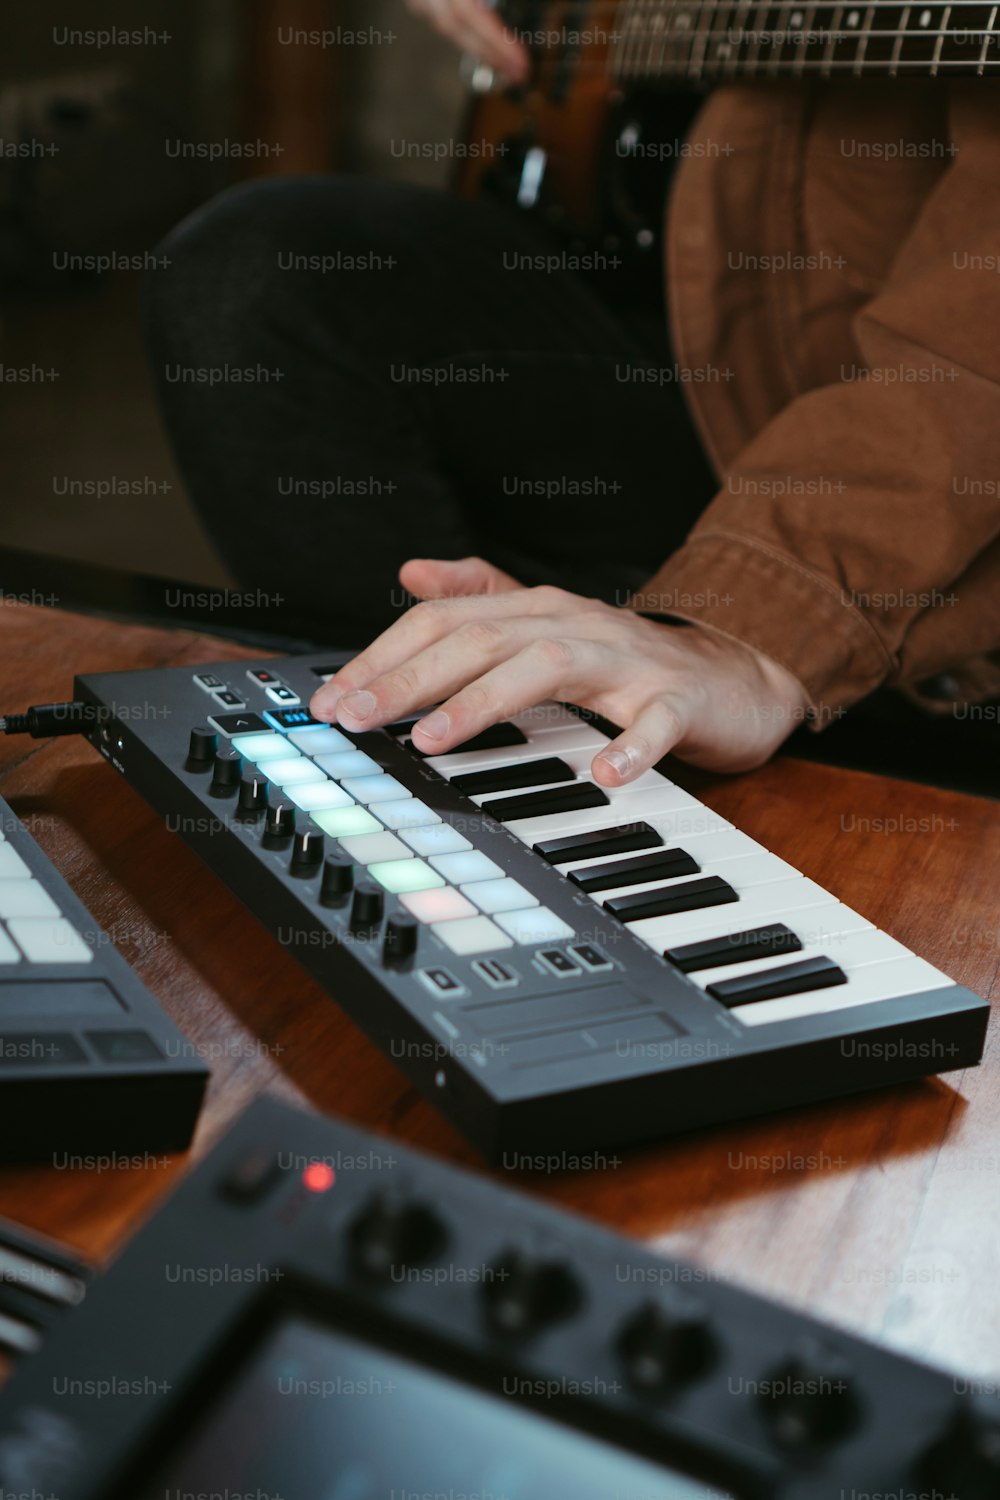 a person playing an electronic keyboard on a table